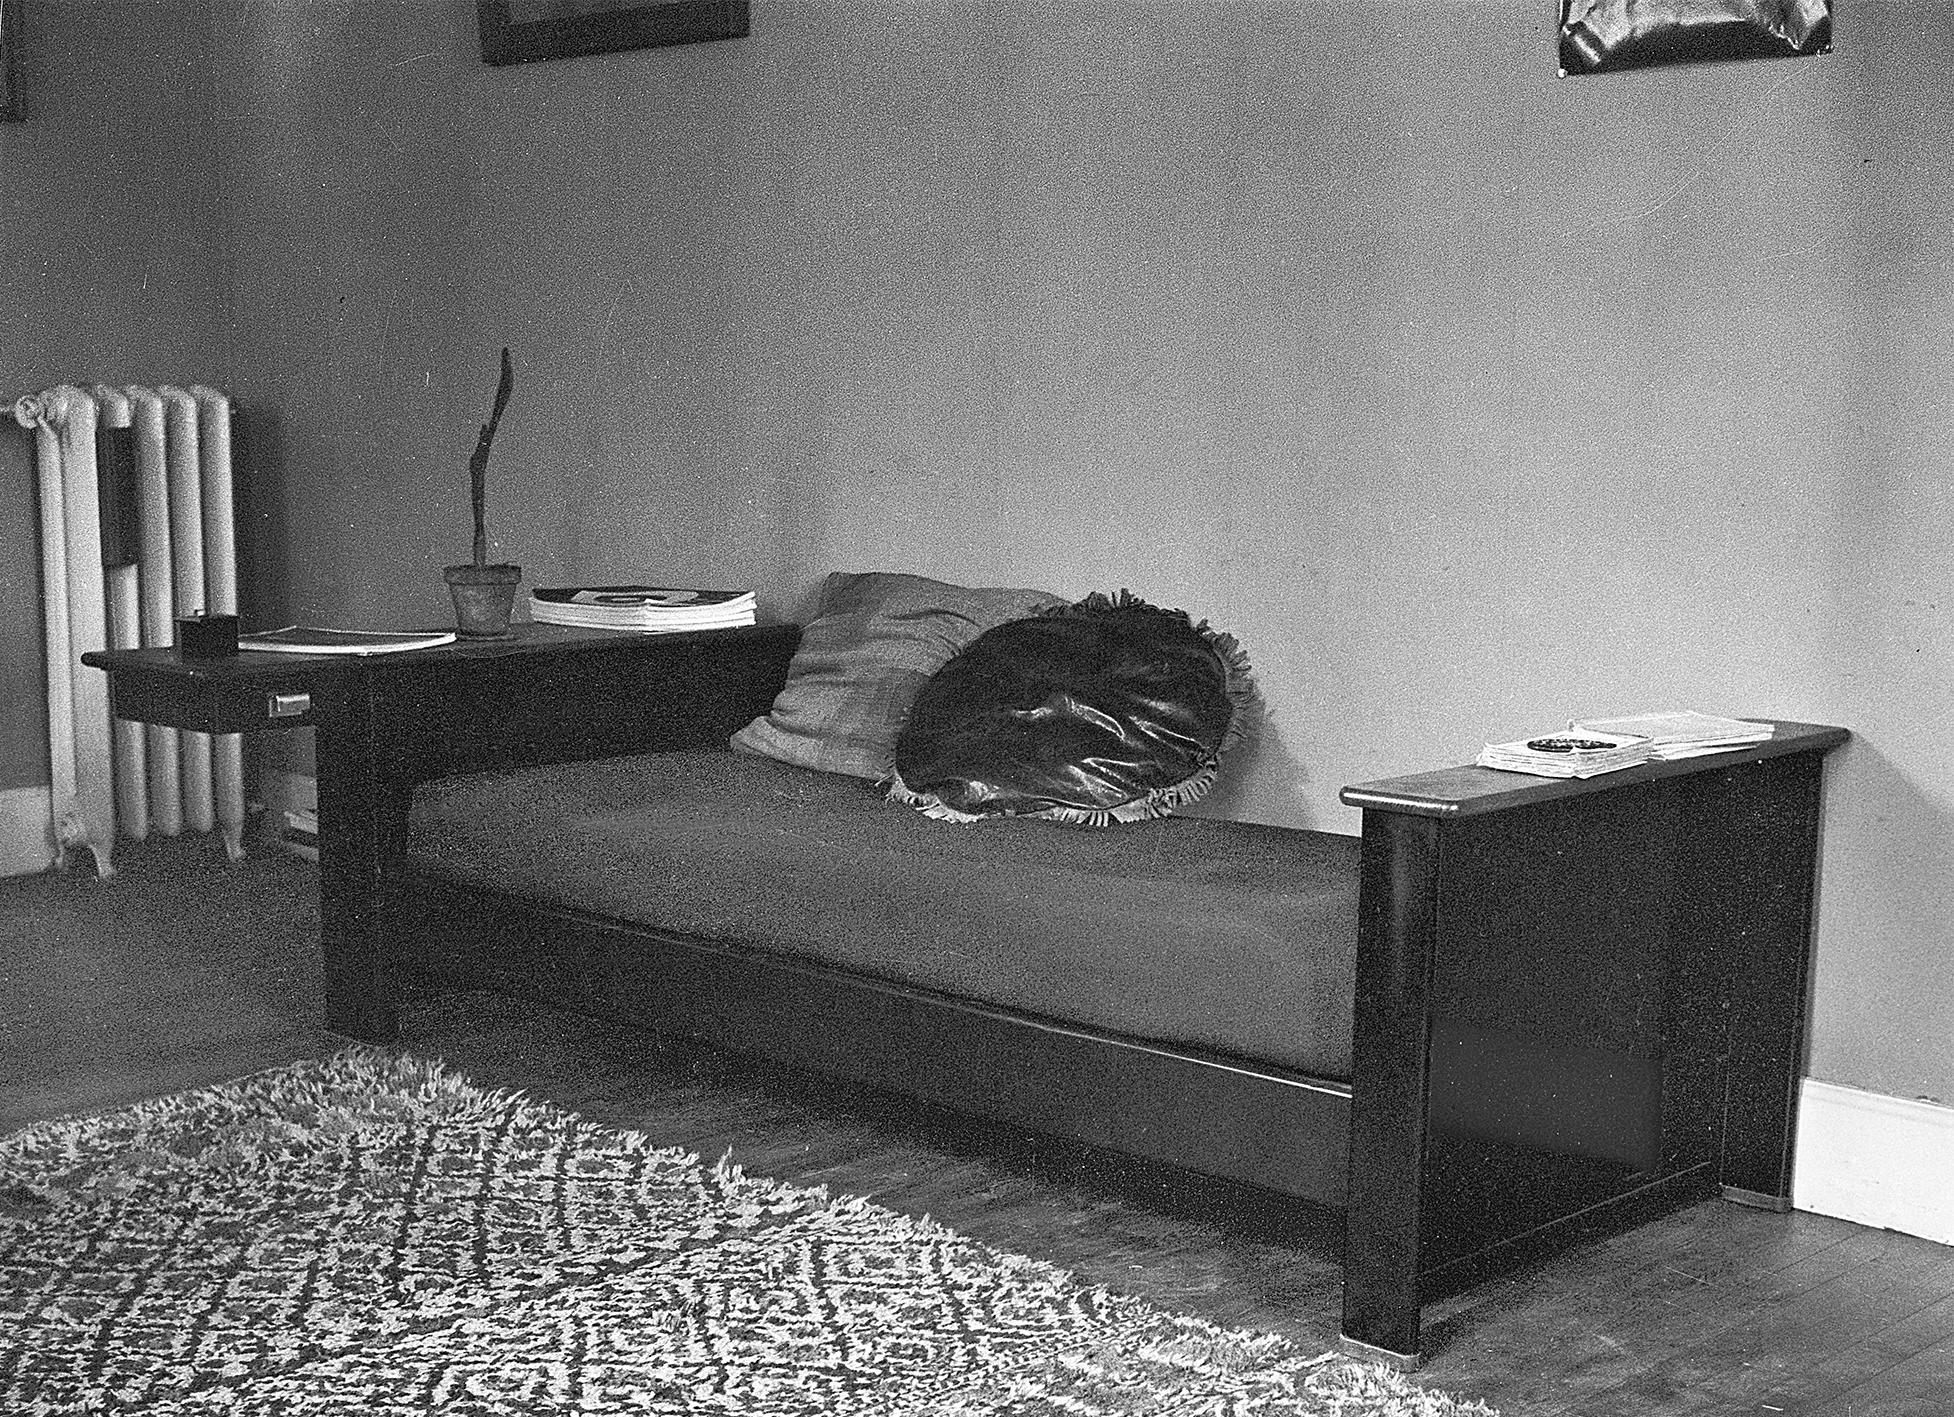 View of apartment, ca. 1950, with sofa bed no. 10, 1935.